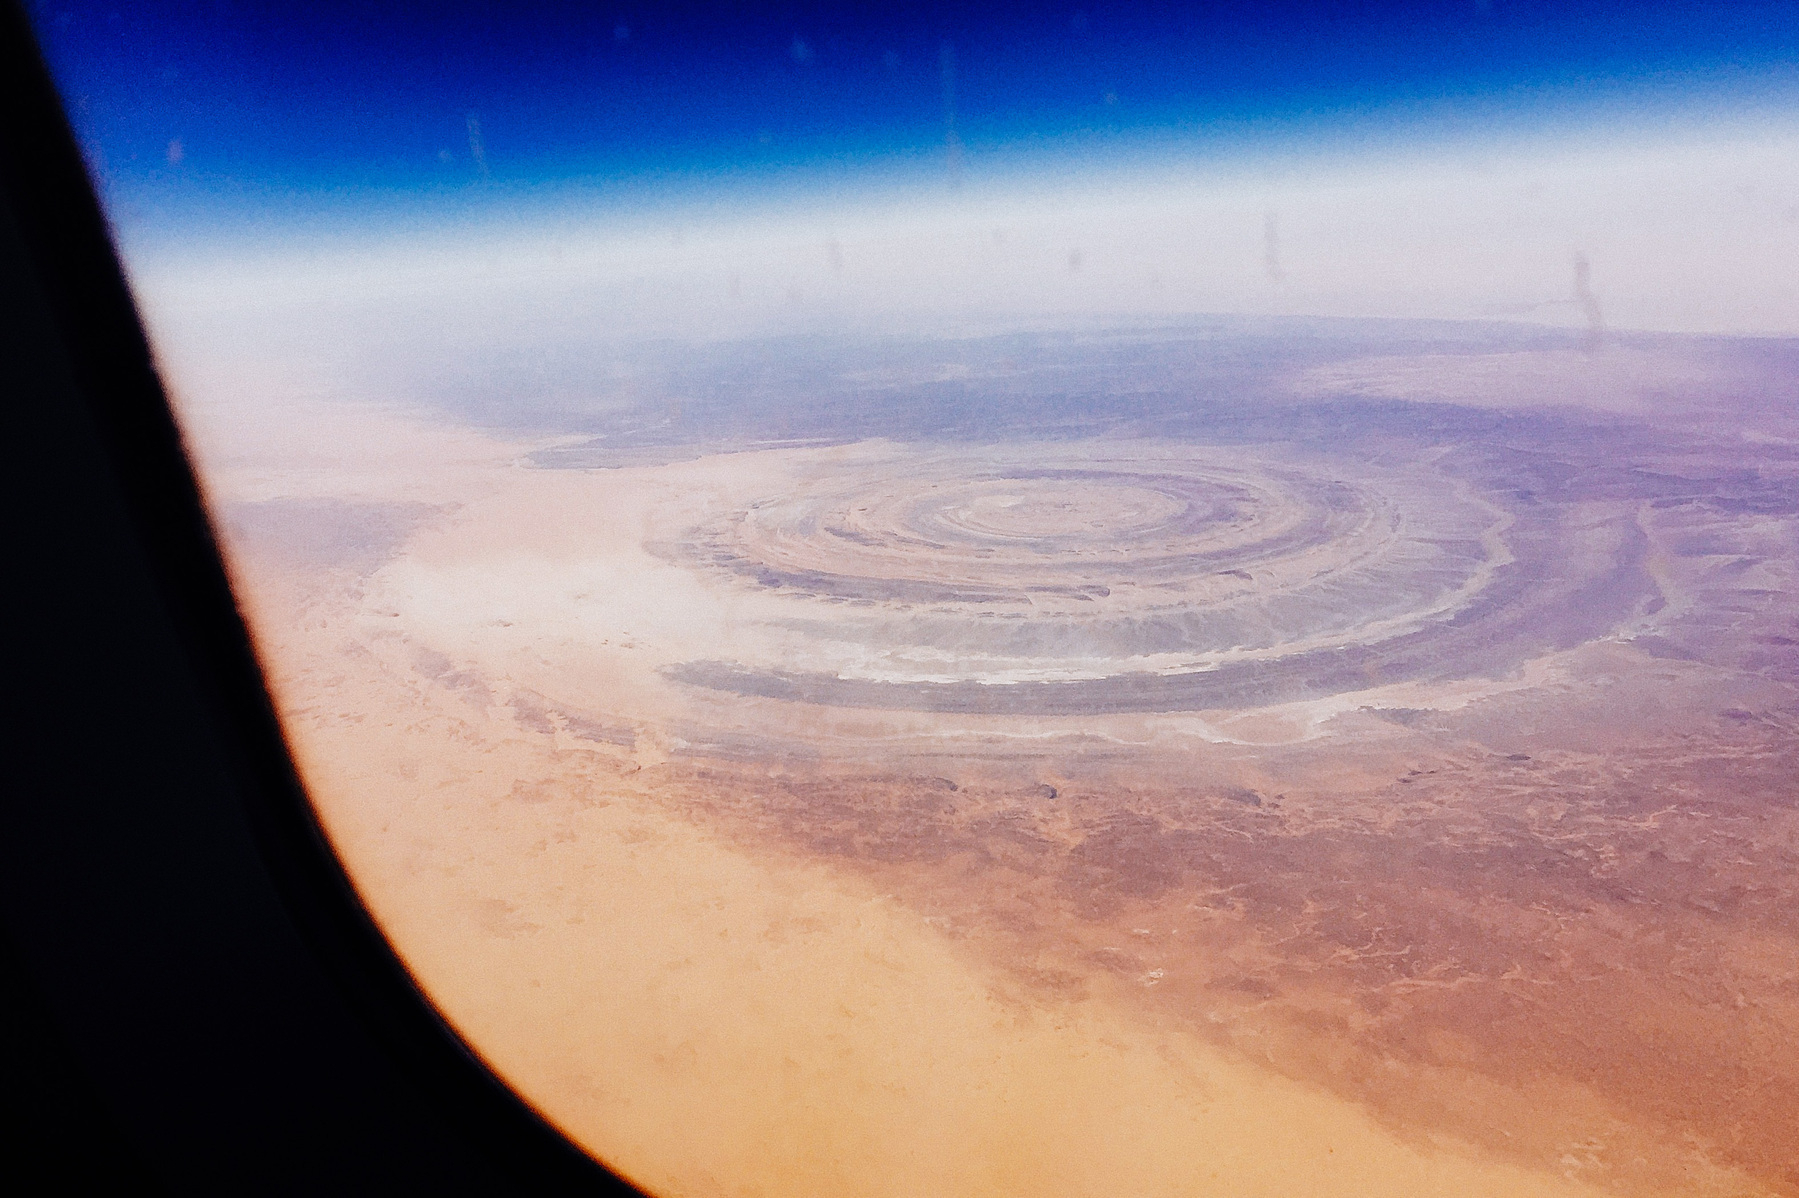 Photo taken from an airplane, shows a circular pattern in the middle of the desert.